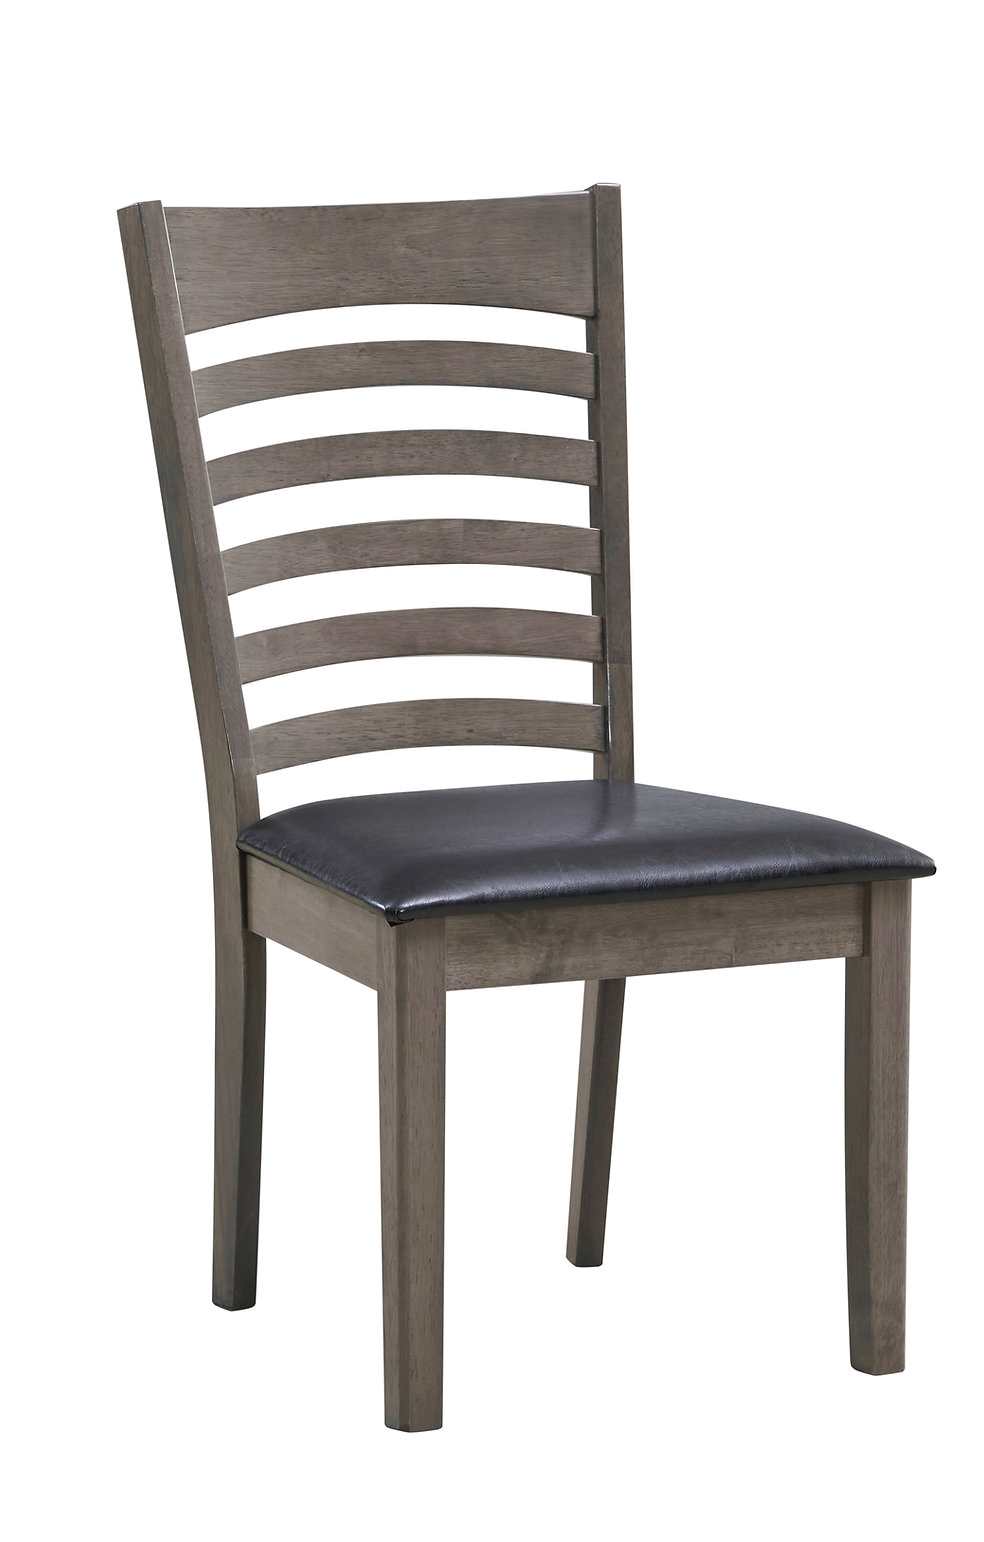 2 Piece Antique Grey Dining Chair in Black PU Seats 1081